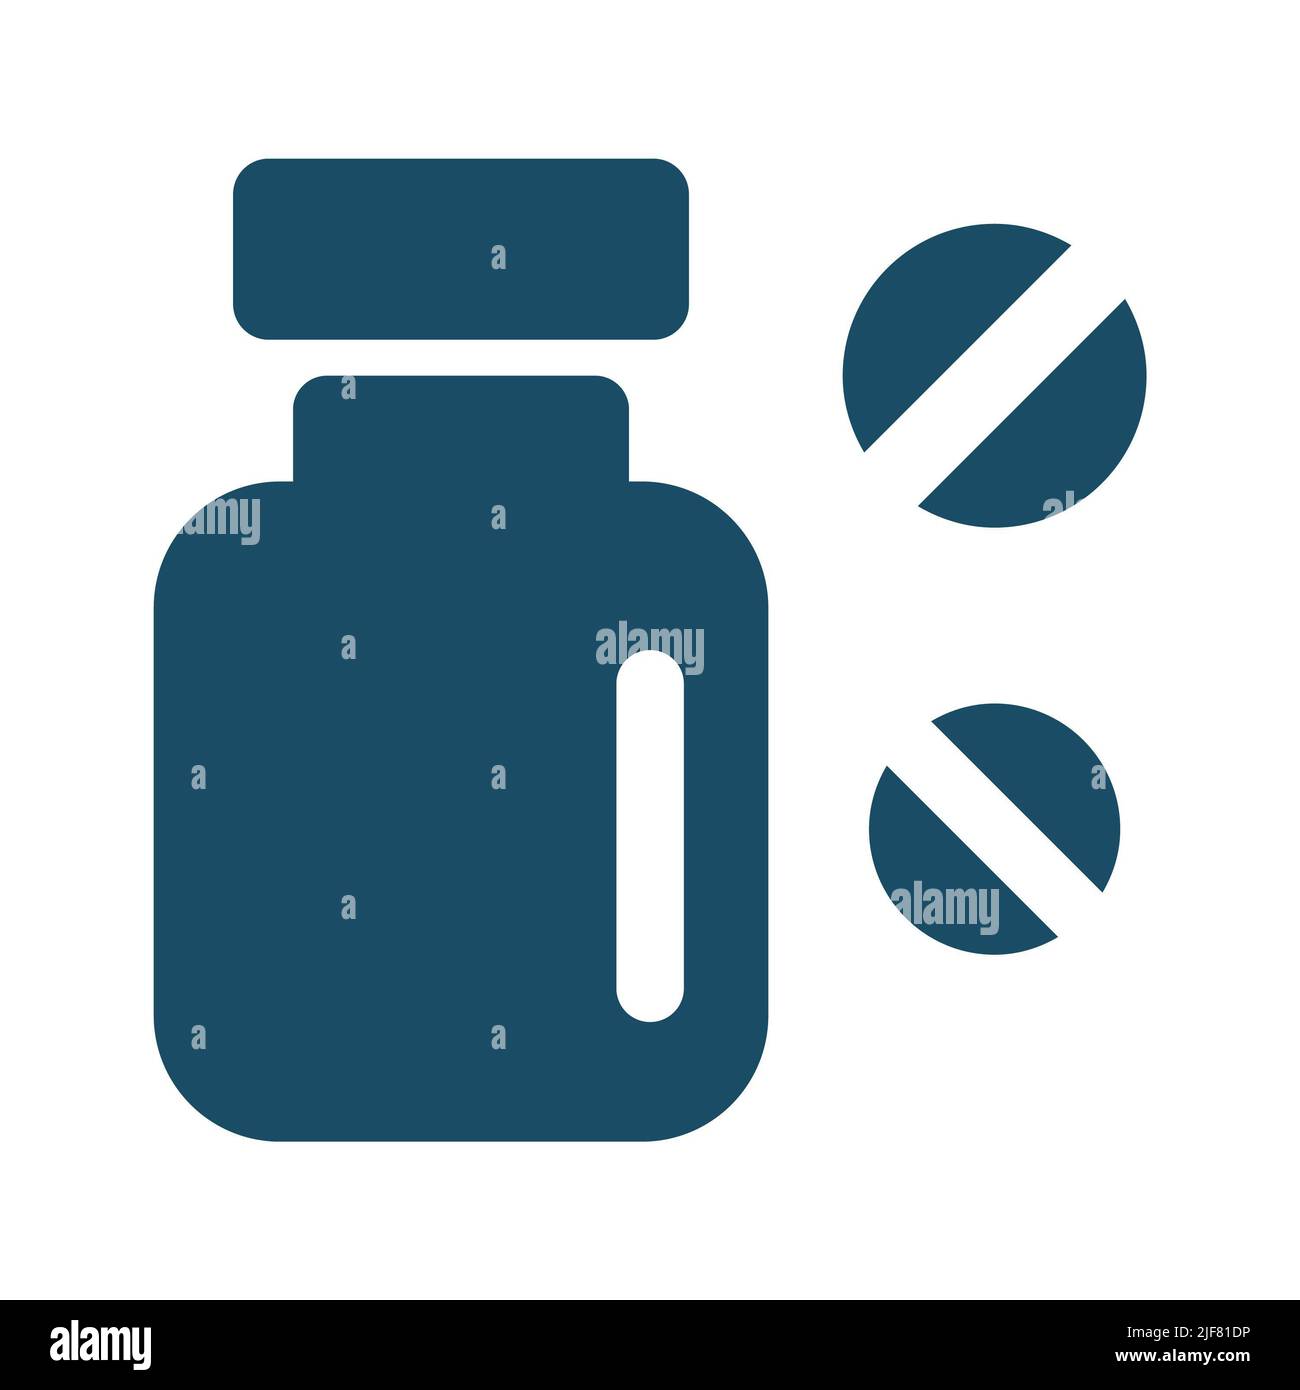 High quality dark blue medicine pills icon. Pictogram, icon set, illustration. Useful for web site, banner, greeting cards, apps and social media post Stock Photo